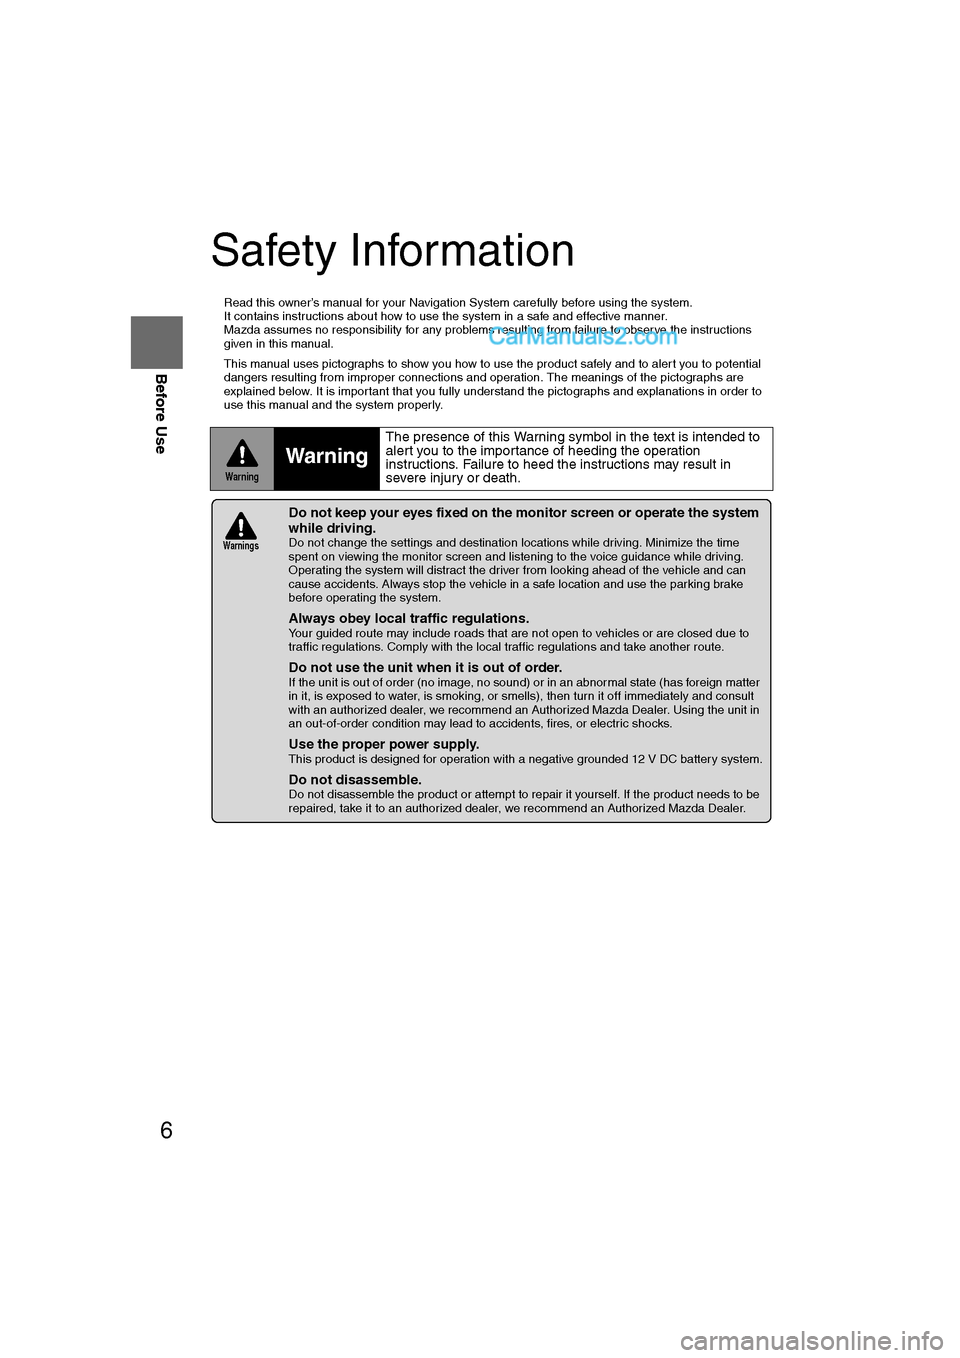 MAZDA MODEL CX-9 2007  Navigation Manual (in English) 6
Before Use
Navigation 
Set Up
RDM-TMCIf
necessary
Rear View 
Monitor
Safety Information
n
Read this owner’s manual for your Navigation System carefully before using the system. 
It contains instru